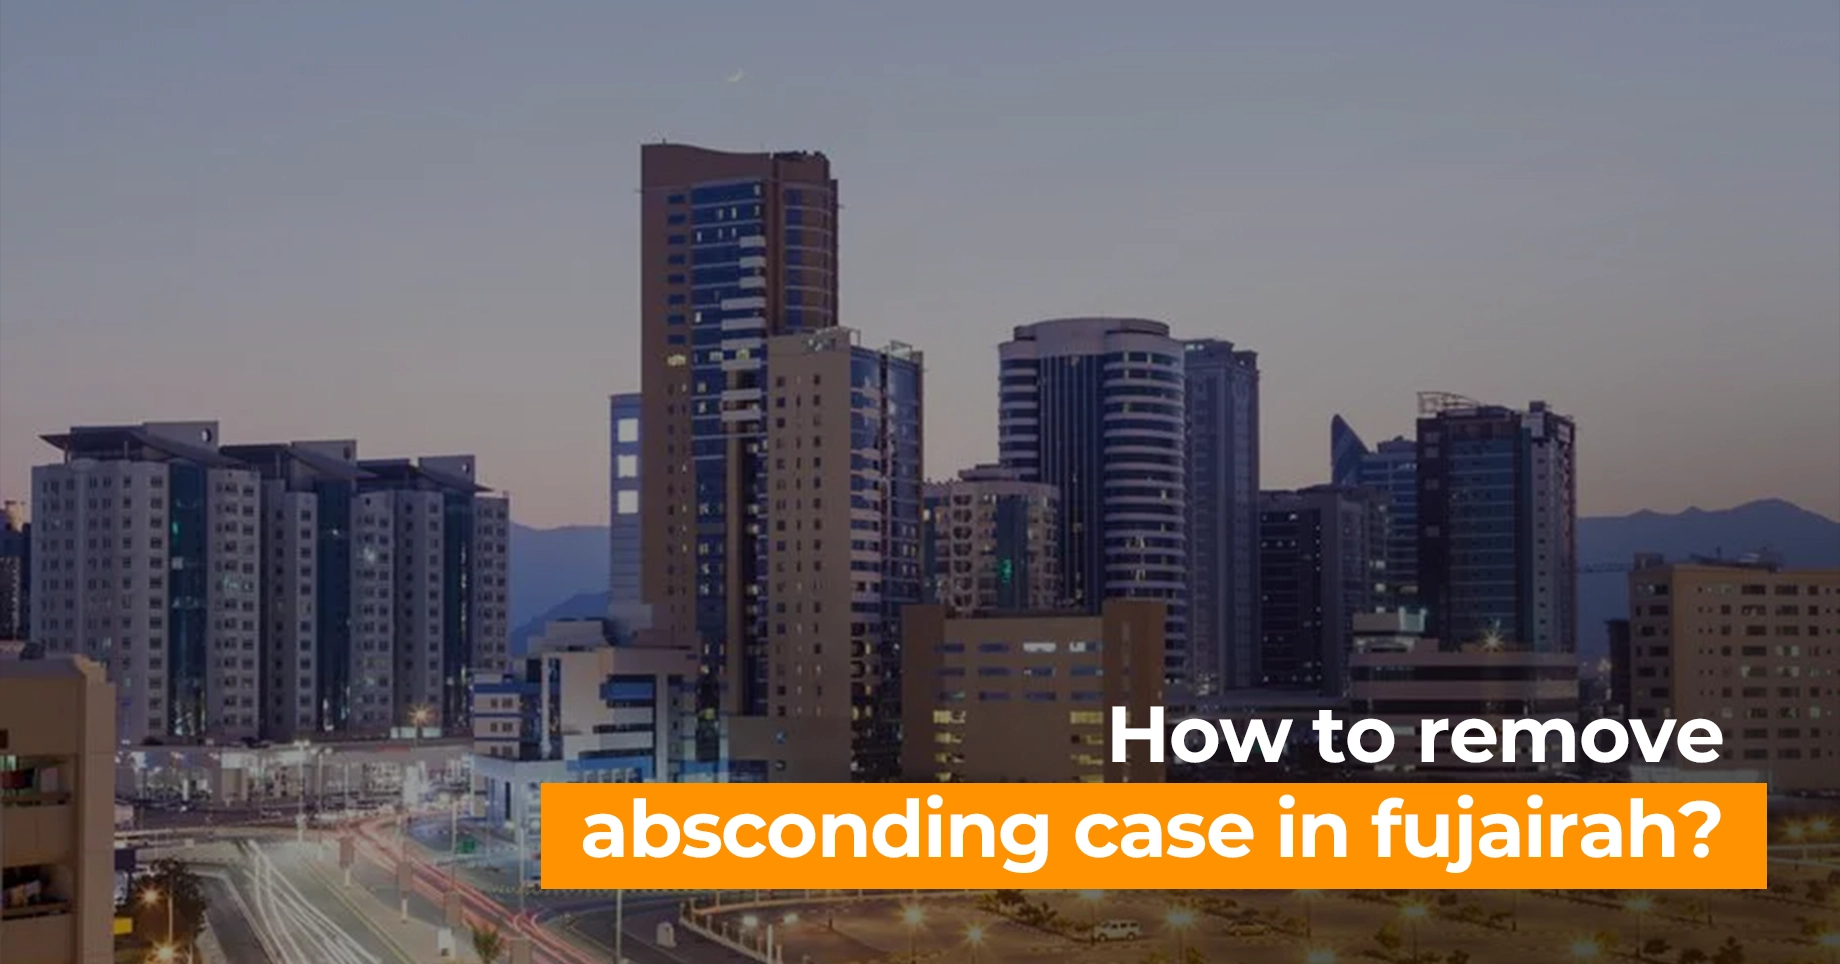 How to Remove an Absconding Case in Fujairah